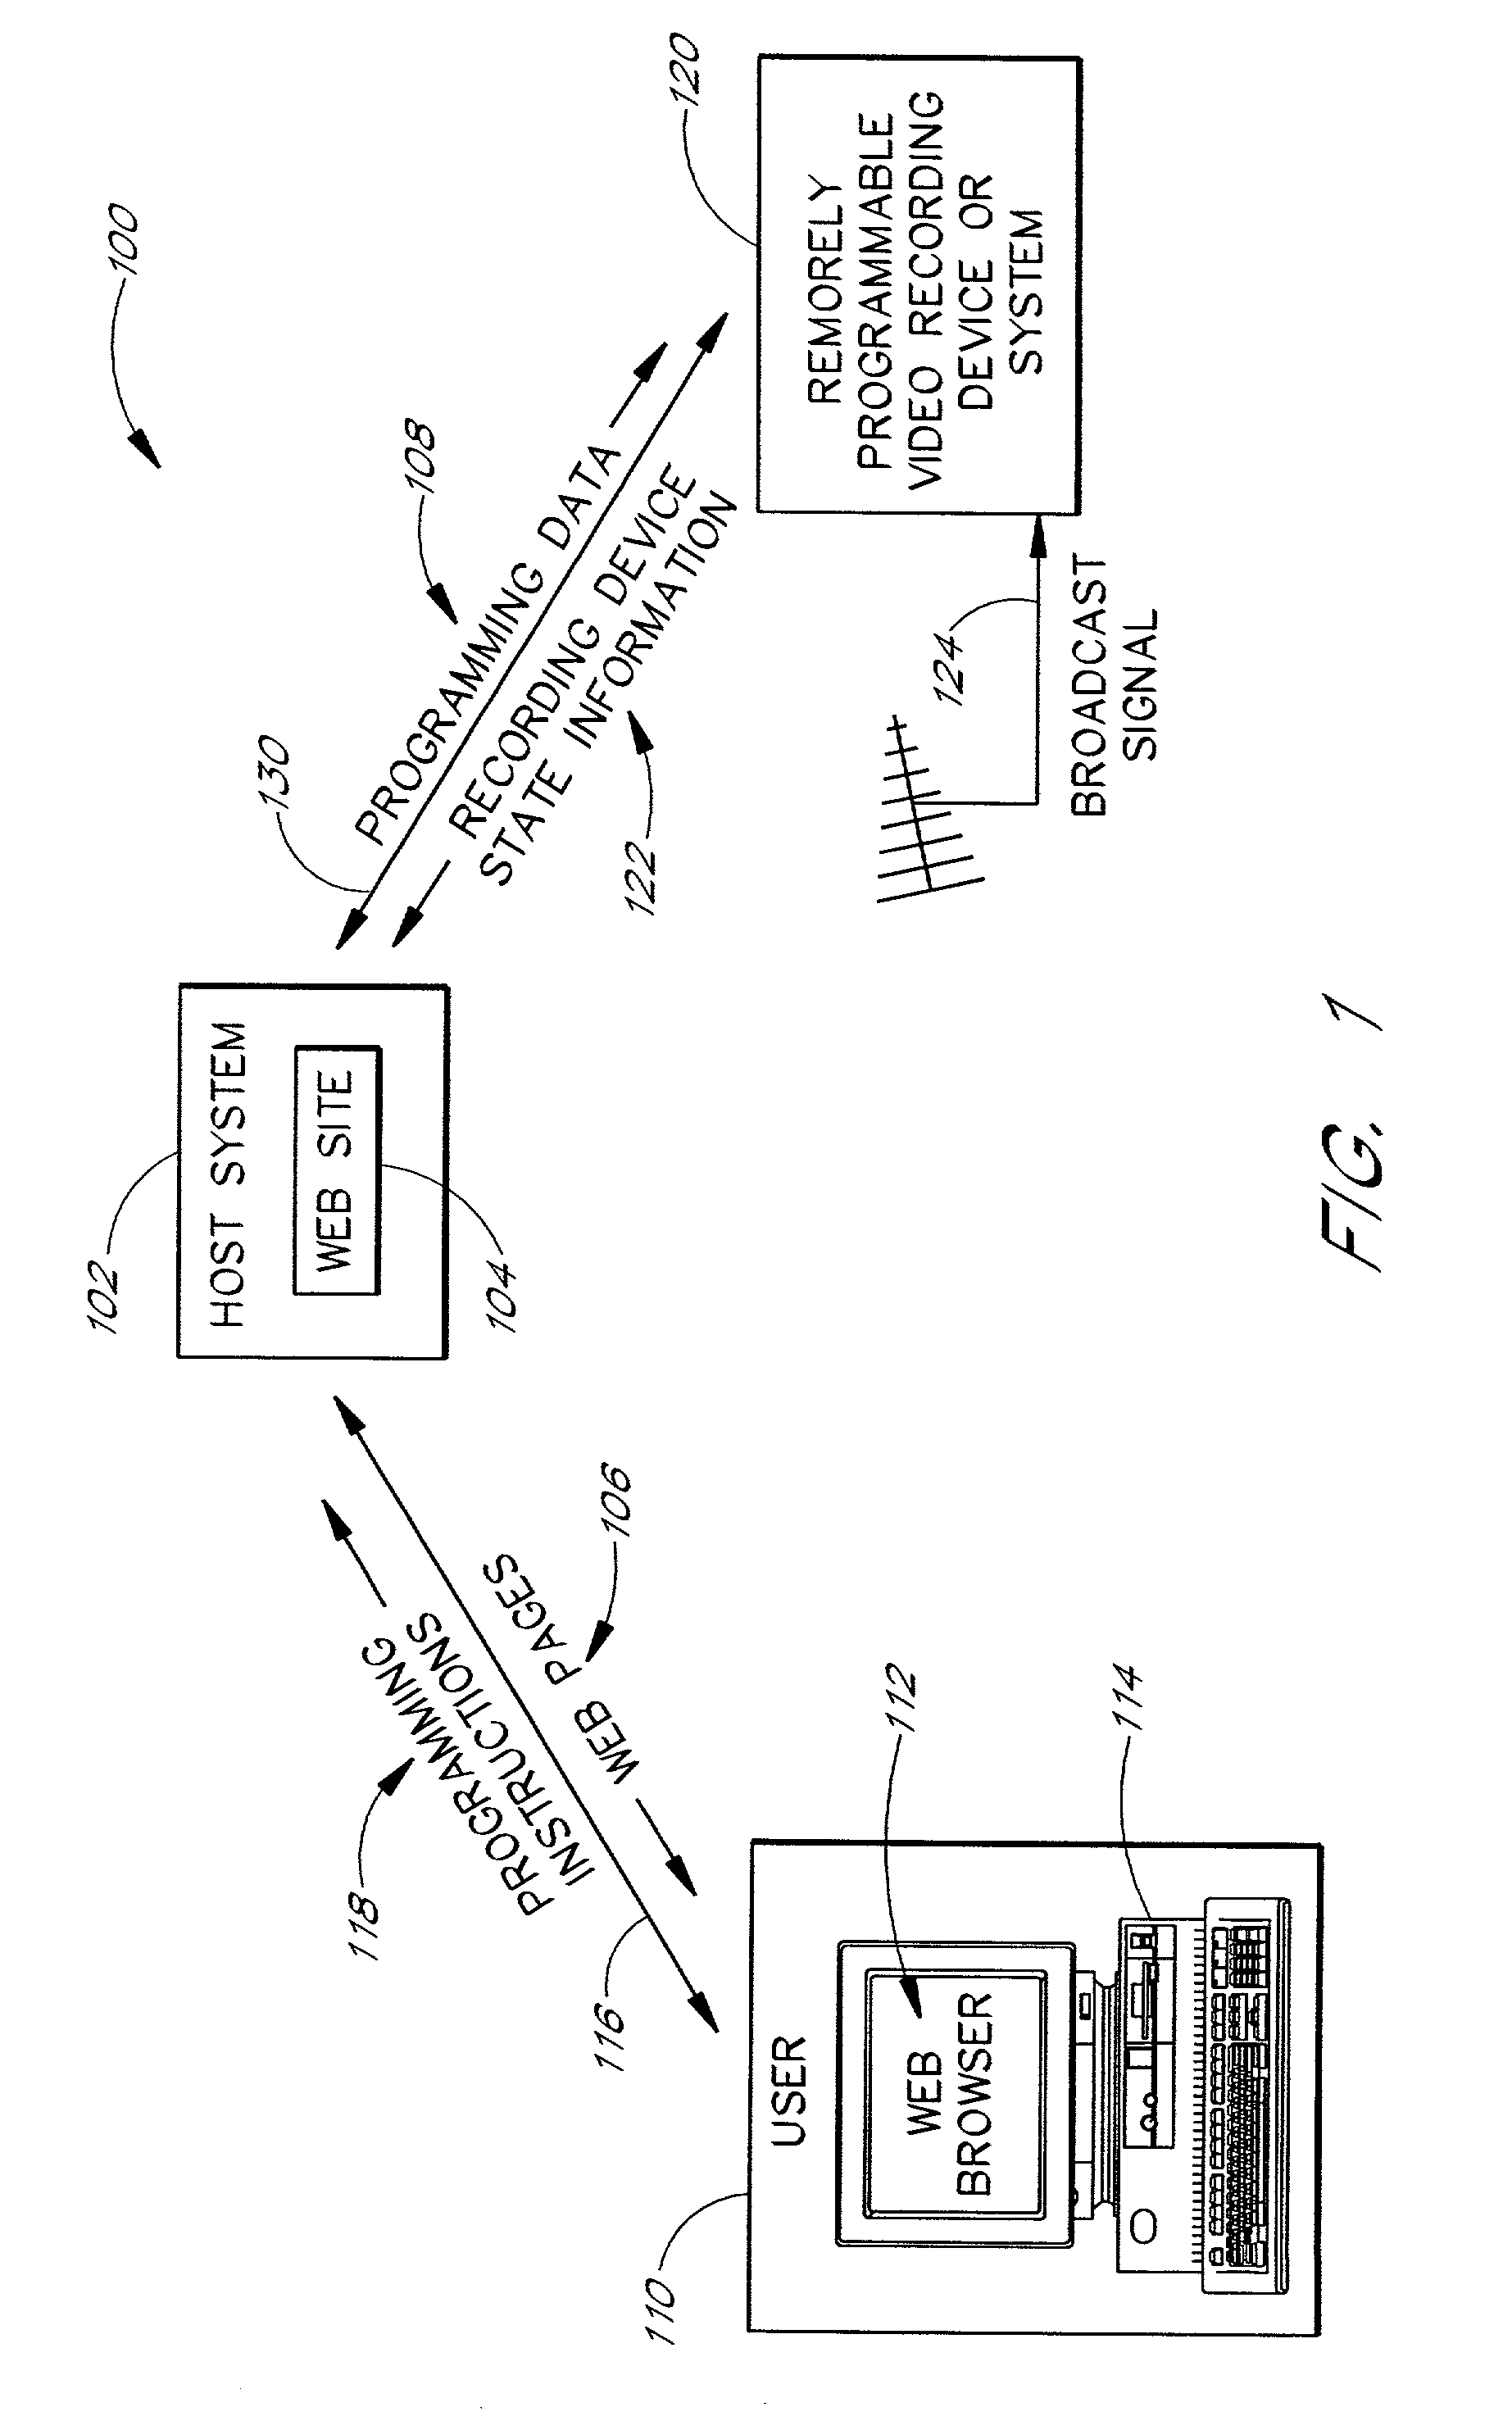 Use of web pages to remotely program a broadcast content recording system